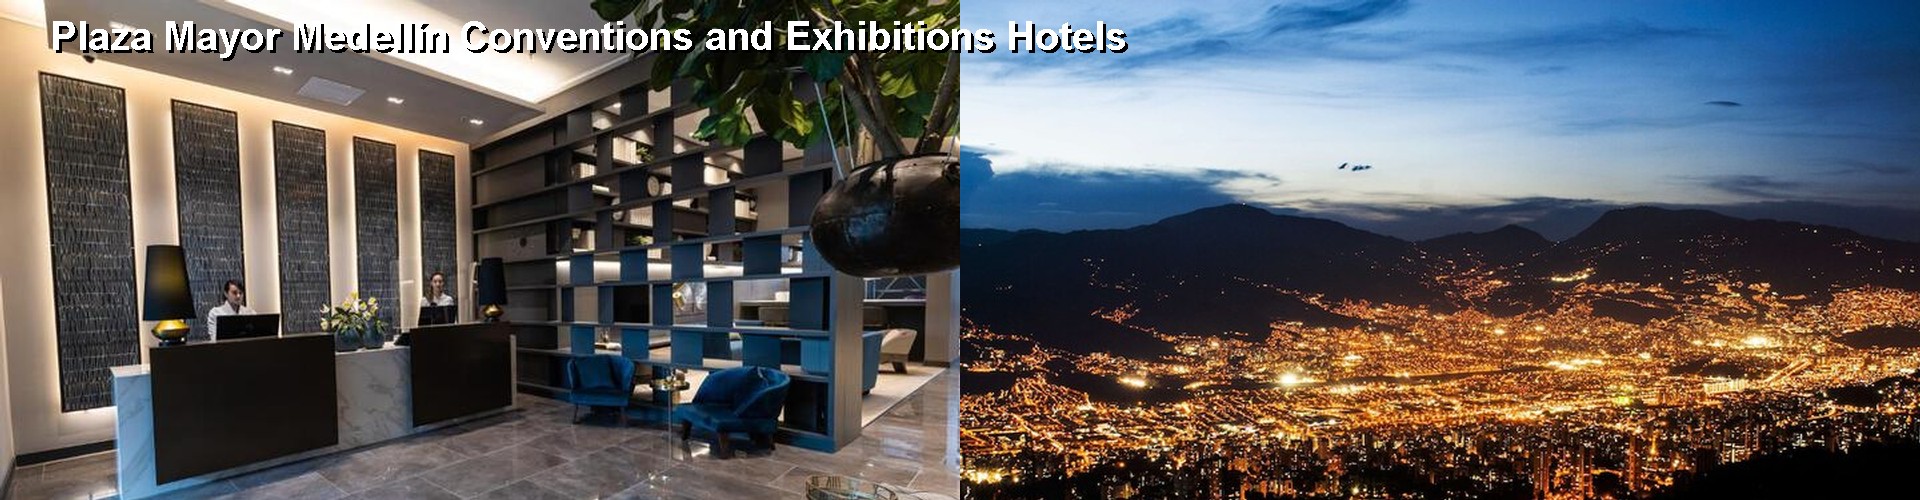 5 Best Hotels near Plaza Mayor Medellín Conventions and Exhibitions